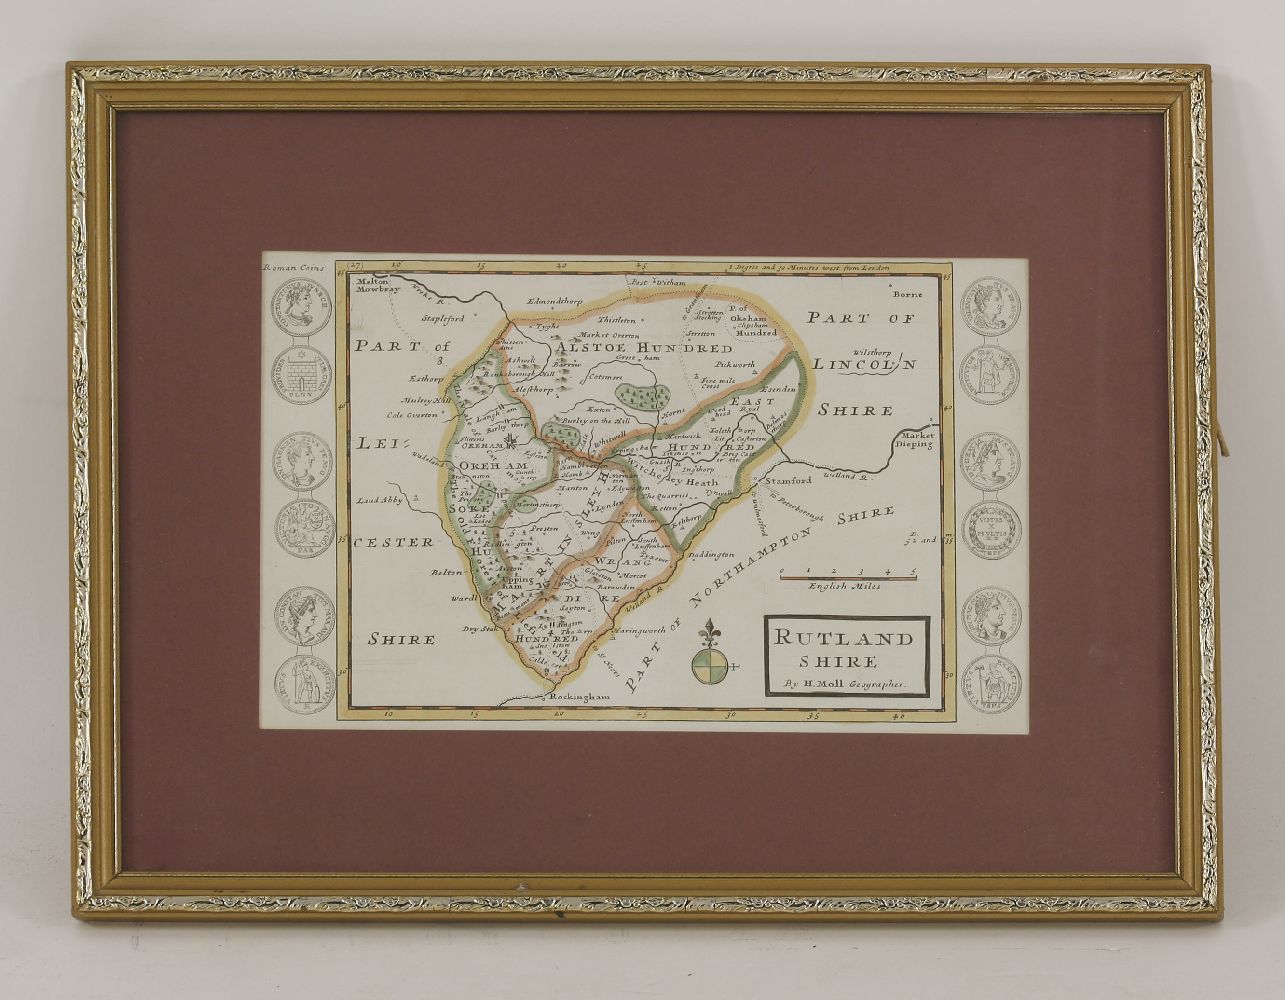 R Blome,A Mapp of the County of Rutland with its hundreds,handcoloured,23 x 23cm,A 'miniature Speed' - Image 2 of 3